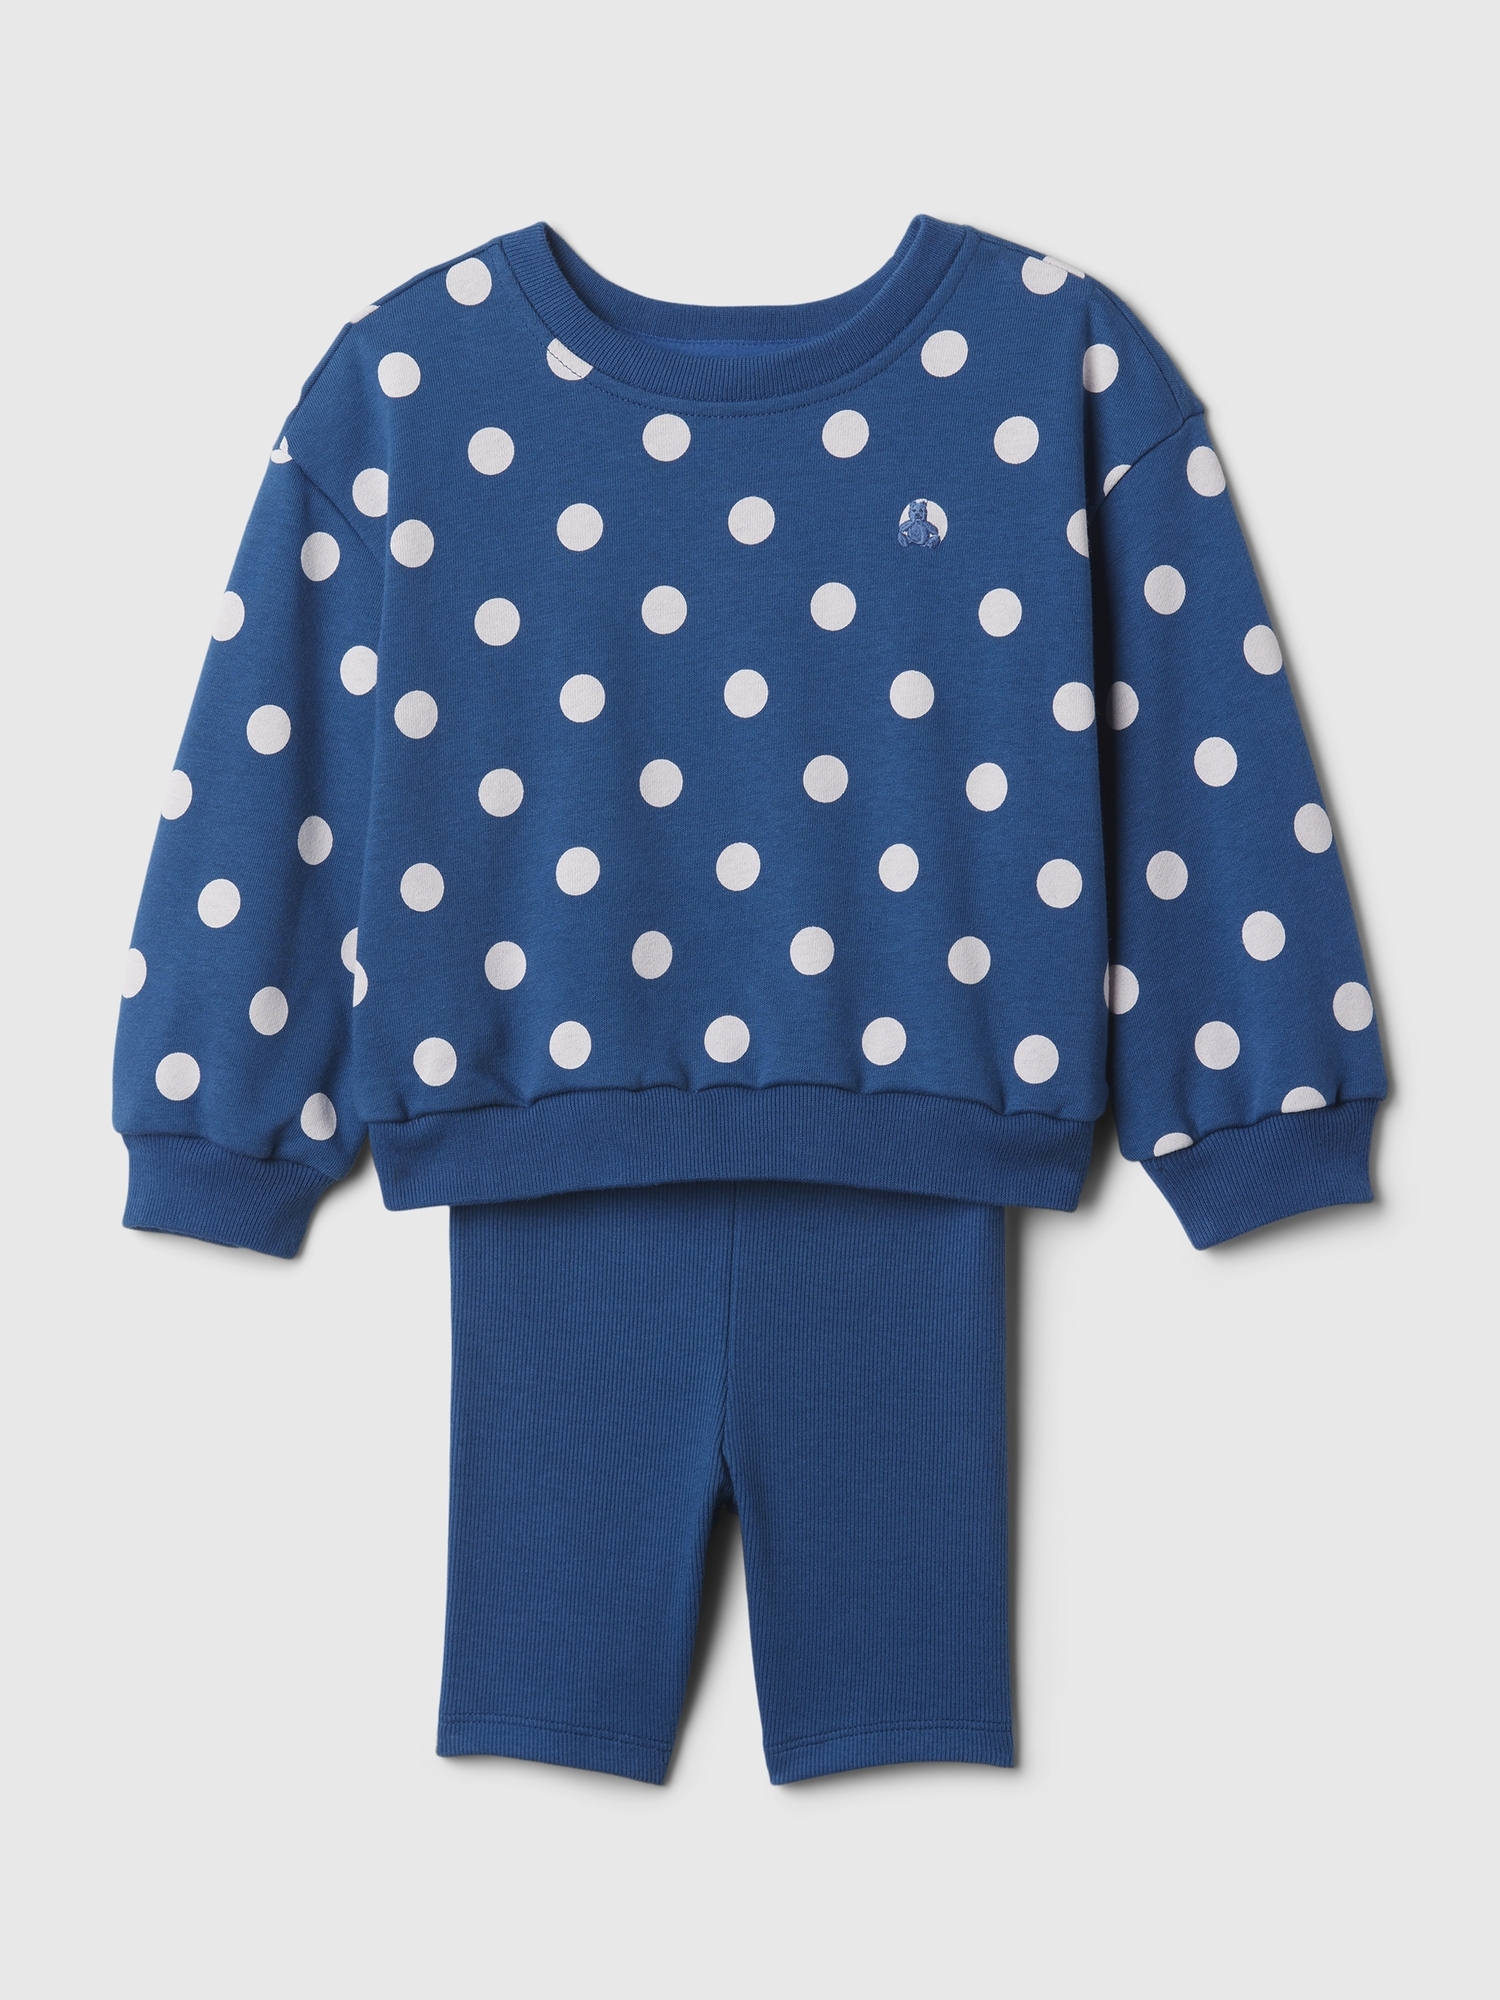 Gap Baby Two-piece Outfit Set In Polka Dots